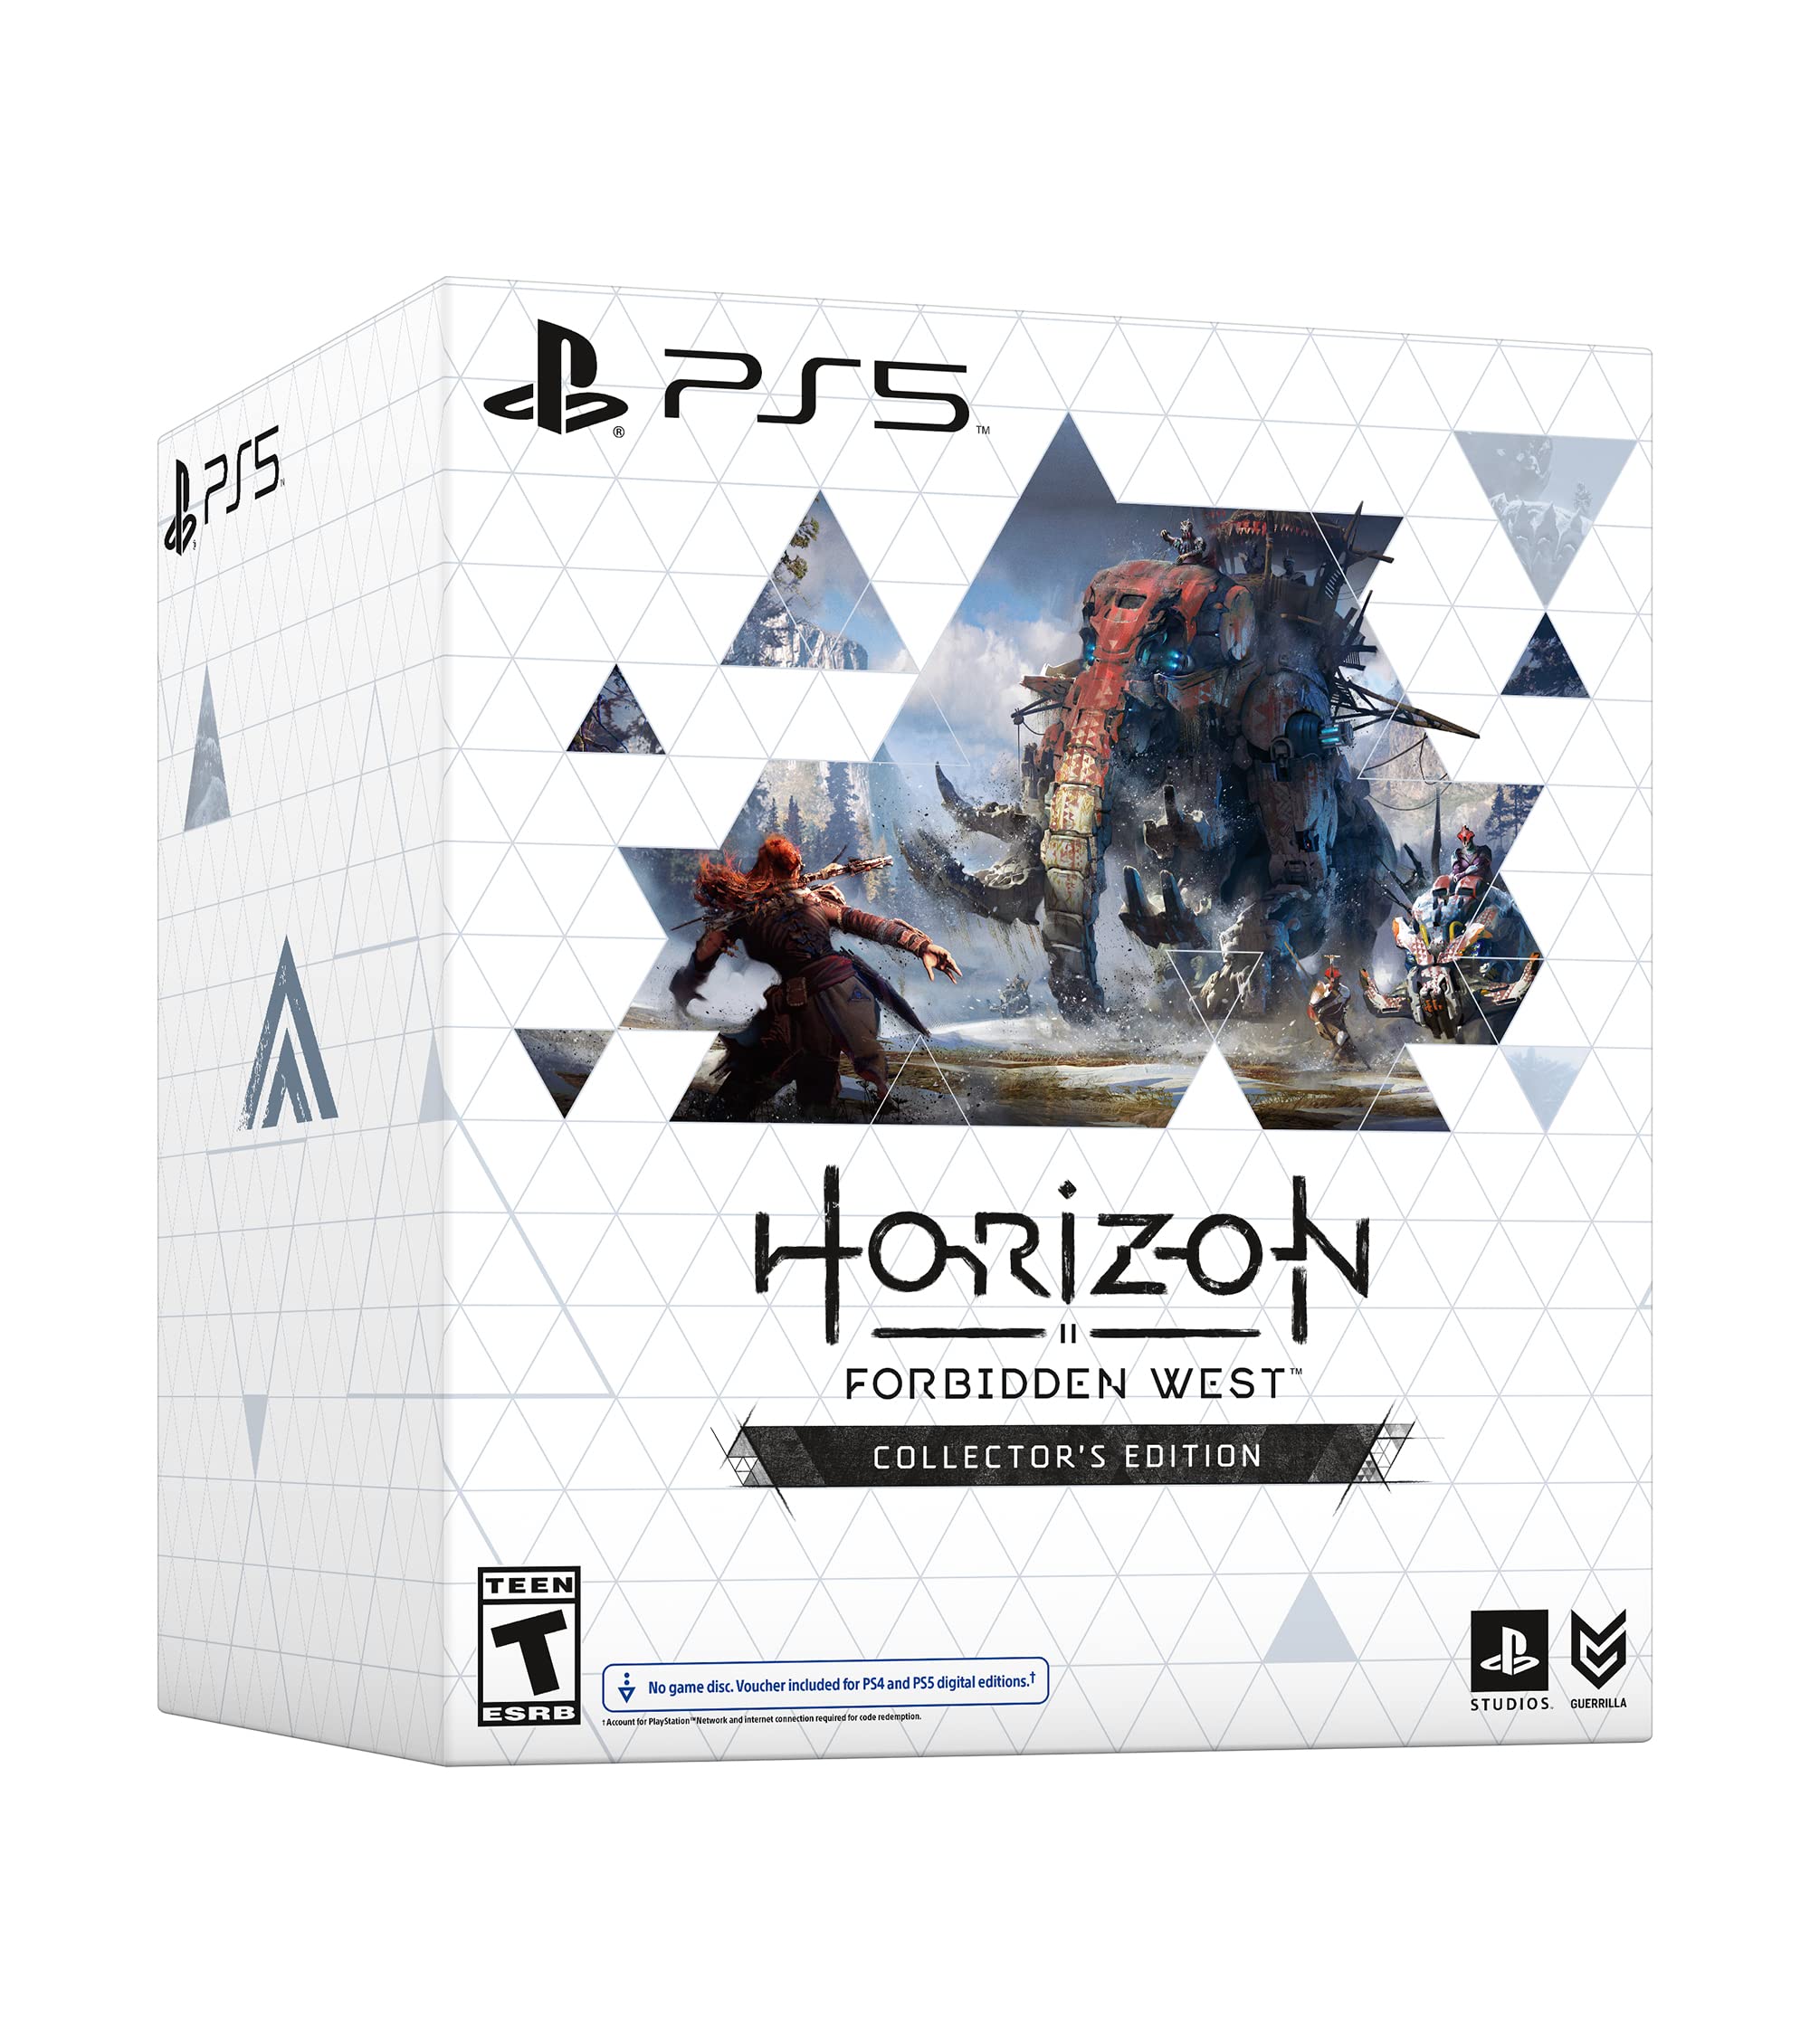 Horizon Forbidden West Collector's Edition - PS4 and PS5 Entitlements